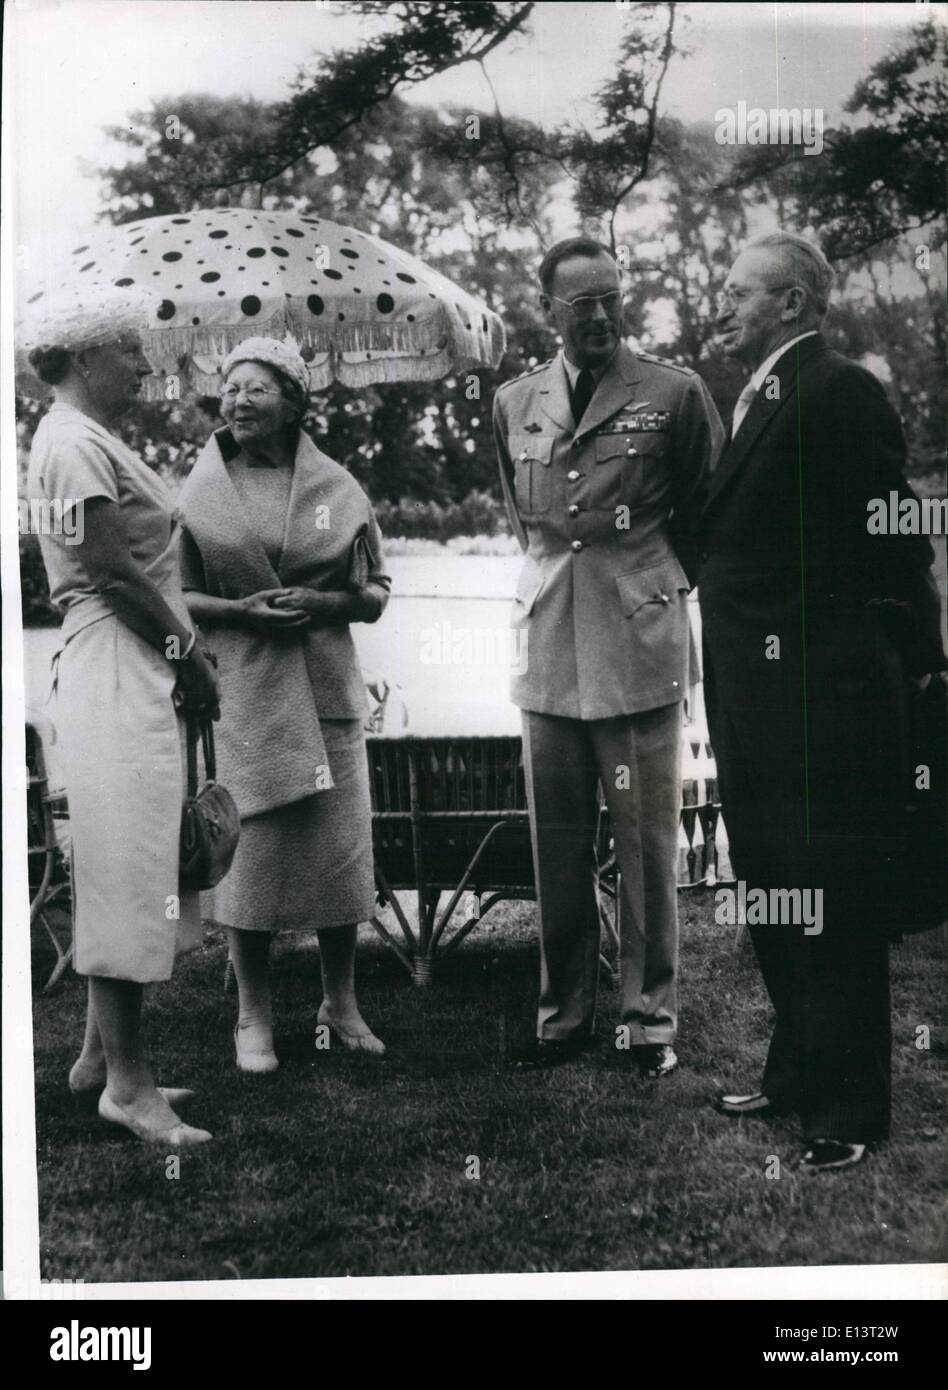 Mar. 27, 2012 - Israel President In Holland. Mr. Issac Ben Zwi, President of Israel and his wife, were received at the Palace ''Huis Ten Bosch'' at the Hague, by Queen Juliana and Prince Bernhard. Photo Shows:- Queen Juliana and Prince Bernhard seen with President Ben Zwi (right), and his wife in the grounds of the Palace yesterday. Stock Photo